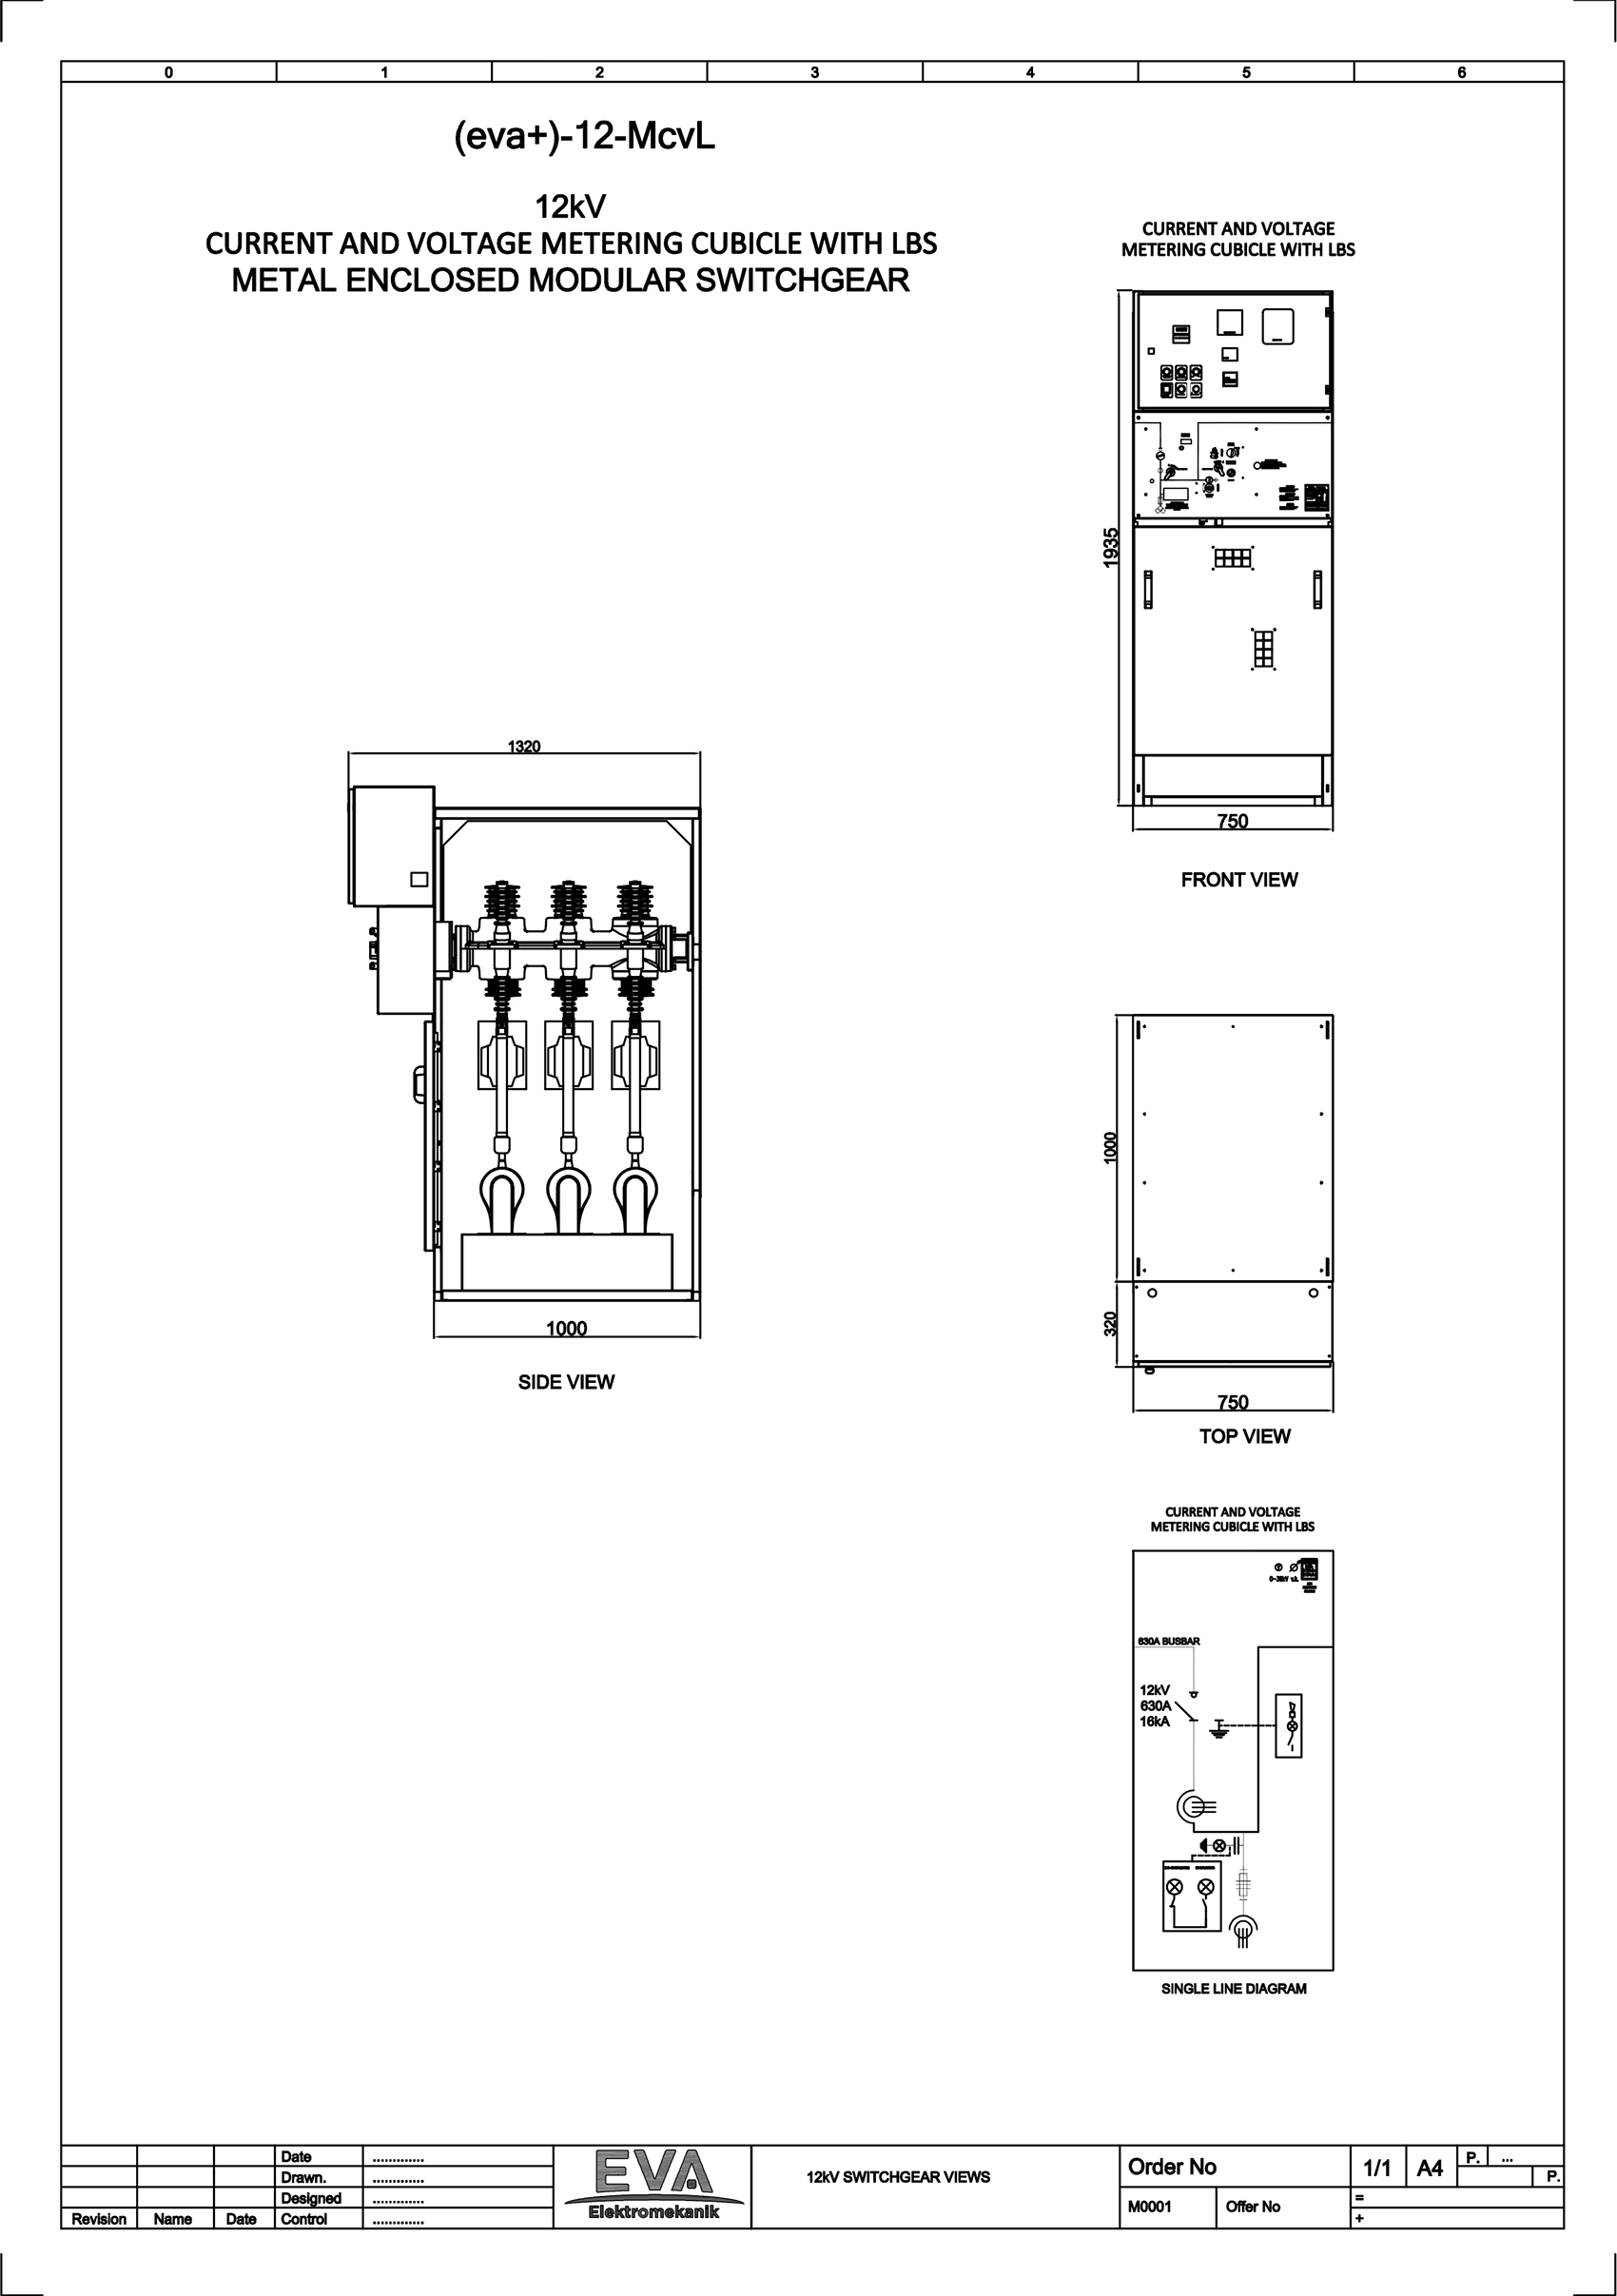 Current and Voltage Metering Cubicle with Load Break Switch (LBS)	